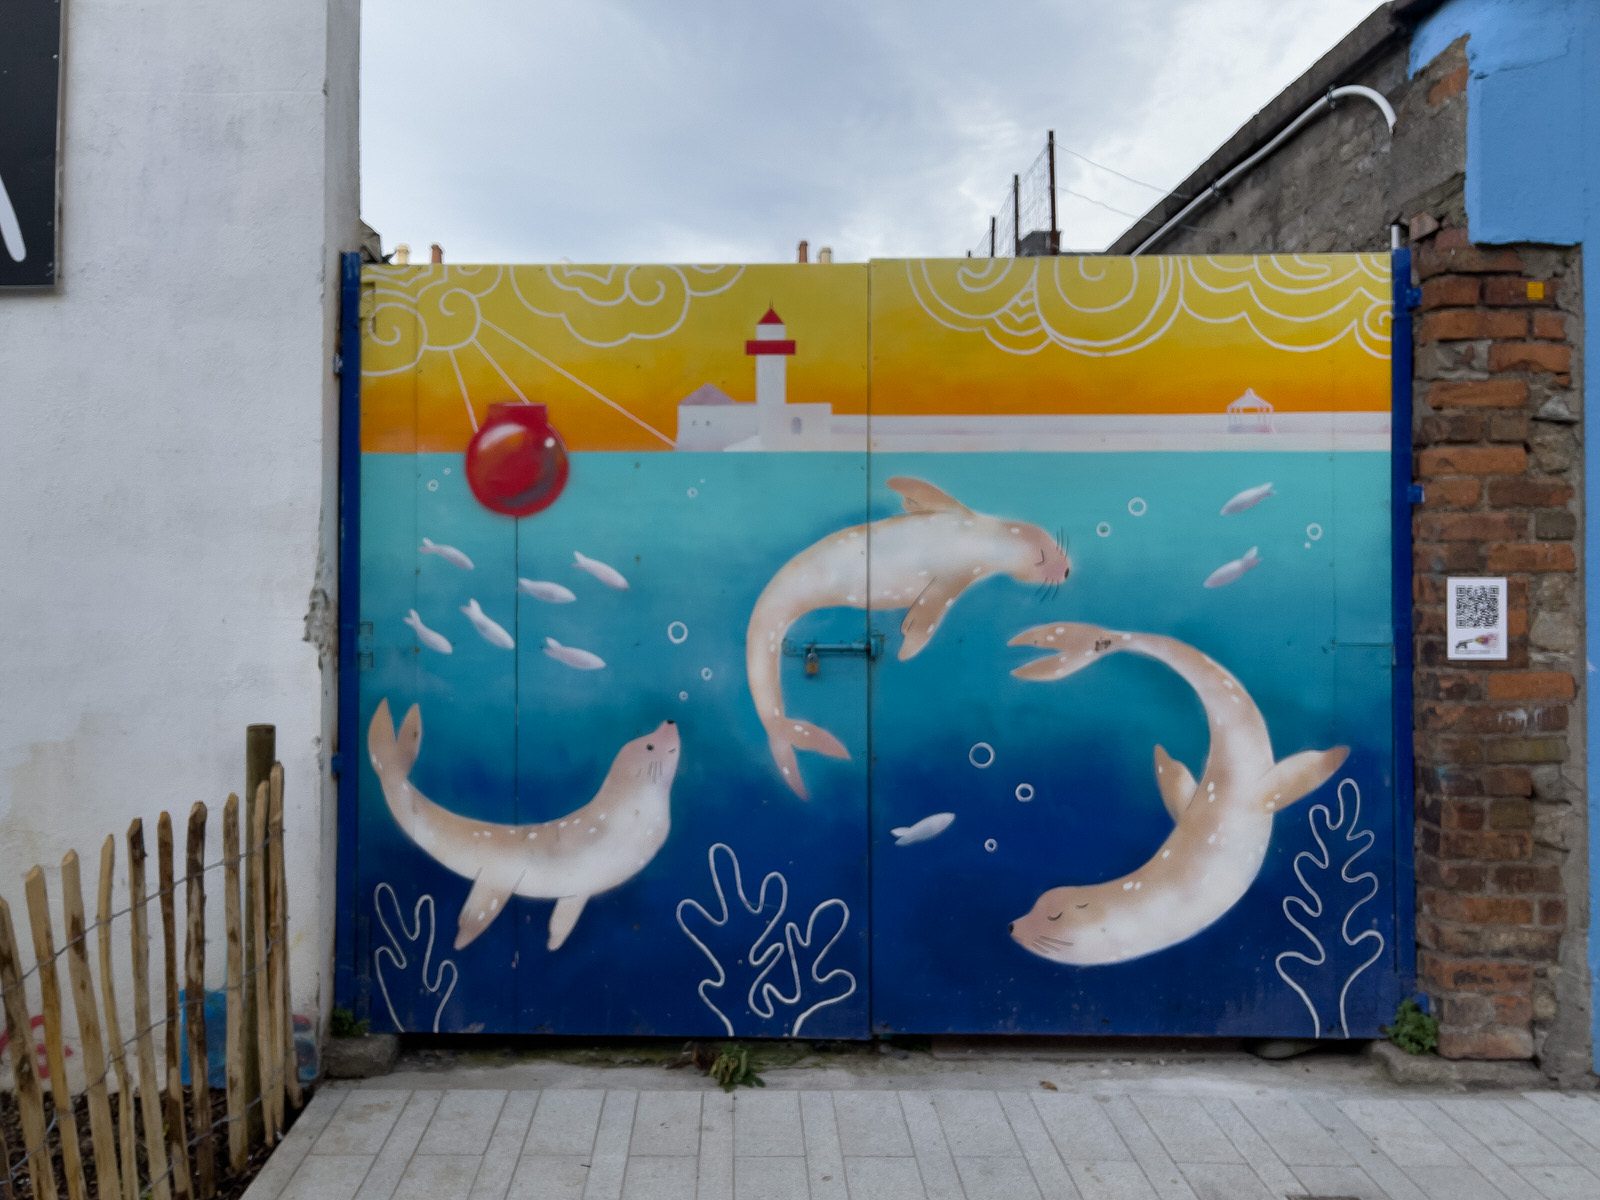 MURALS IN DUN LAOGHAIRE [SECOND SELECTION OF RANDOM IMAGES - ANSEO STREET ART PROJECT] 016